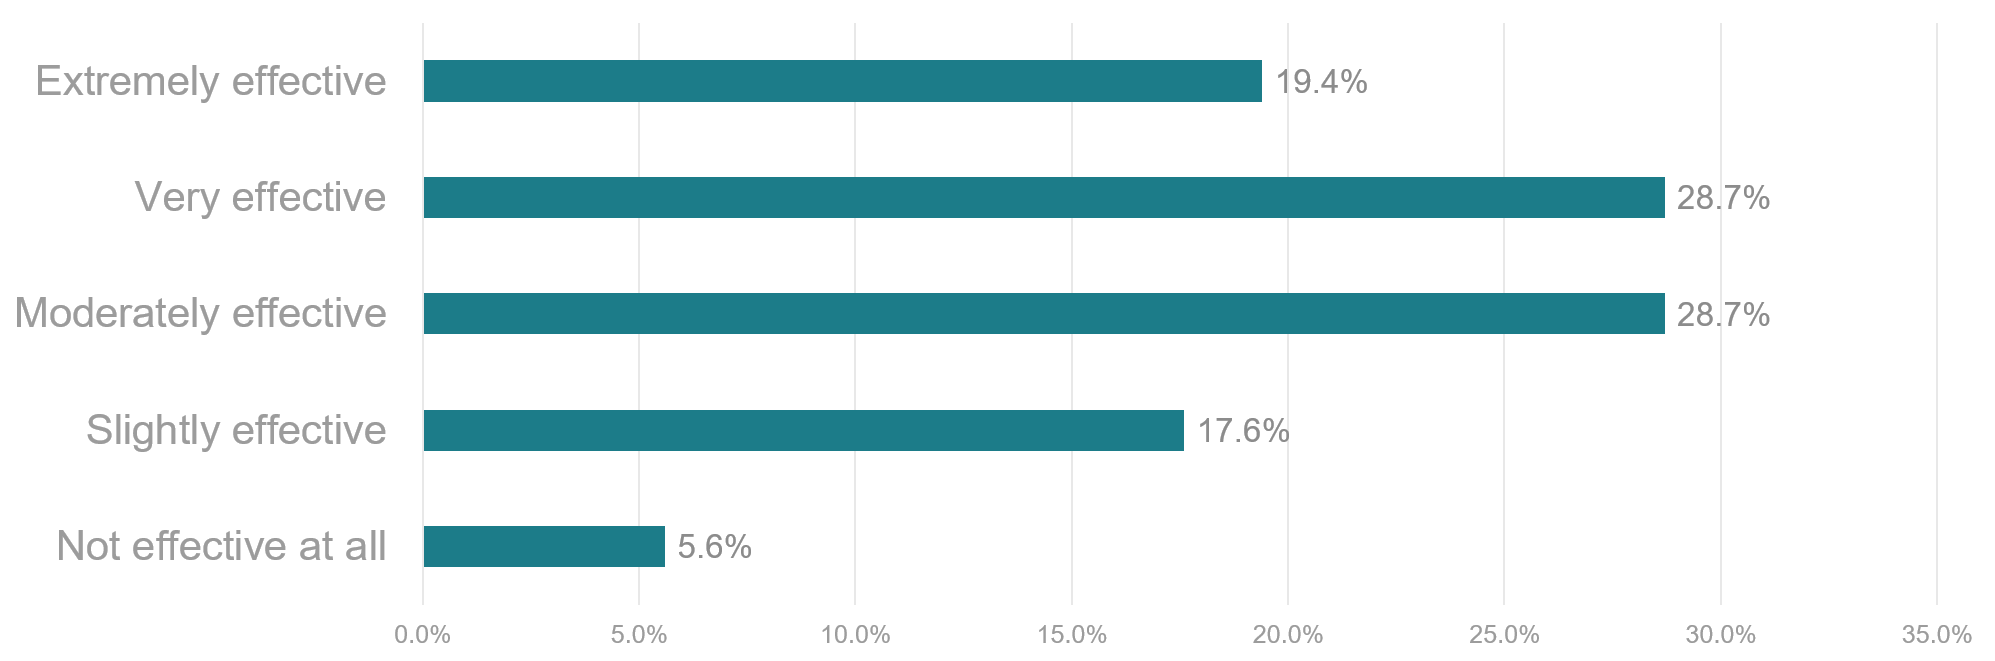 Bar chart describing survey results. 19.4% found communications extremely effective, 28.7% very effective, 28.7% moderately effective, 17.6% slightly effective, and 5.6% not effective at all. 